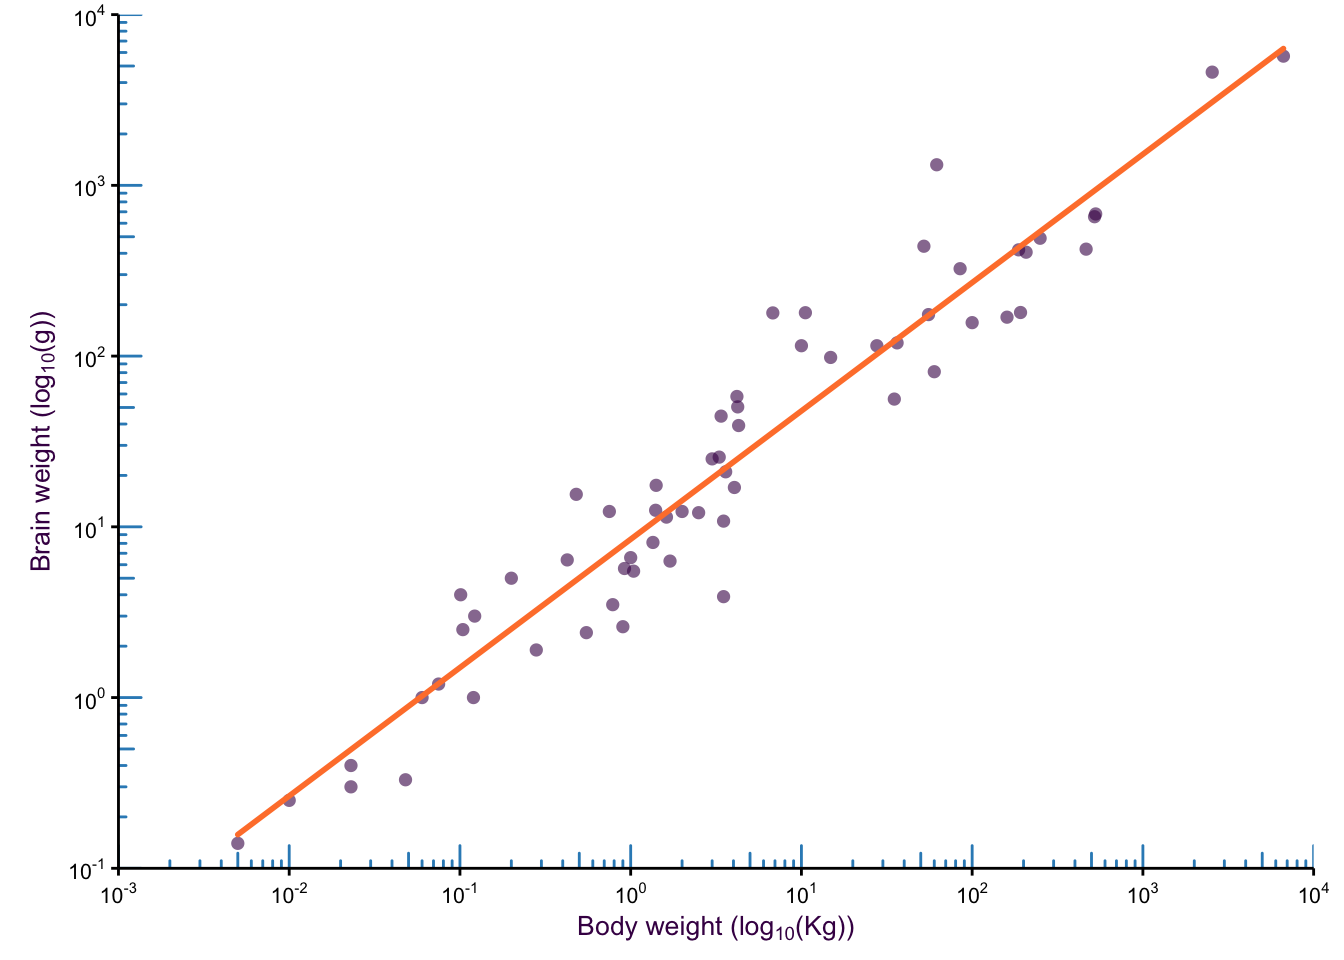 An _explanatory_ figure, in which the trend we want to emphasis is clearly highlighted with a red regression line. The axes tick marks clearly indicate that the data is plotted on log scales.